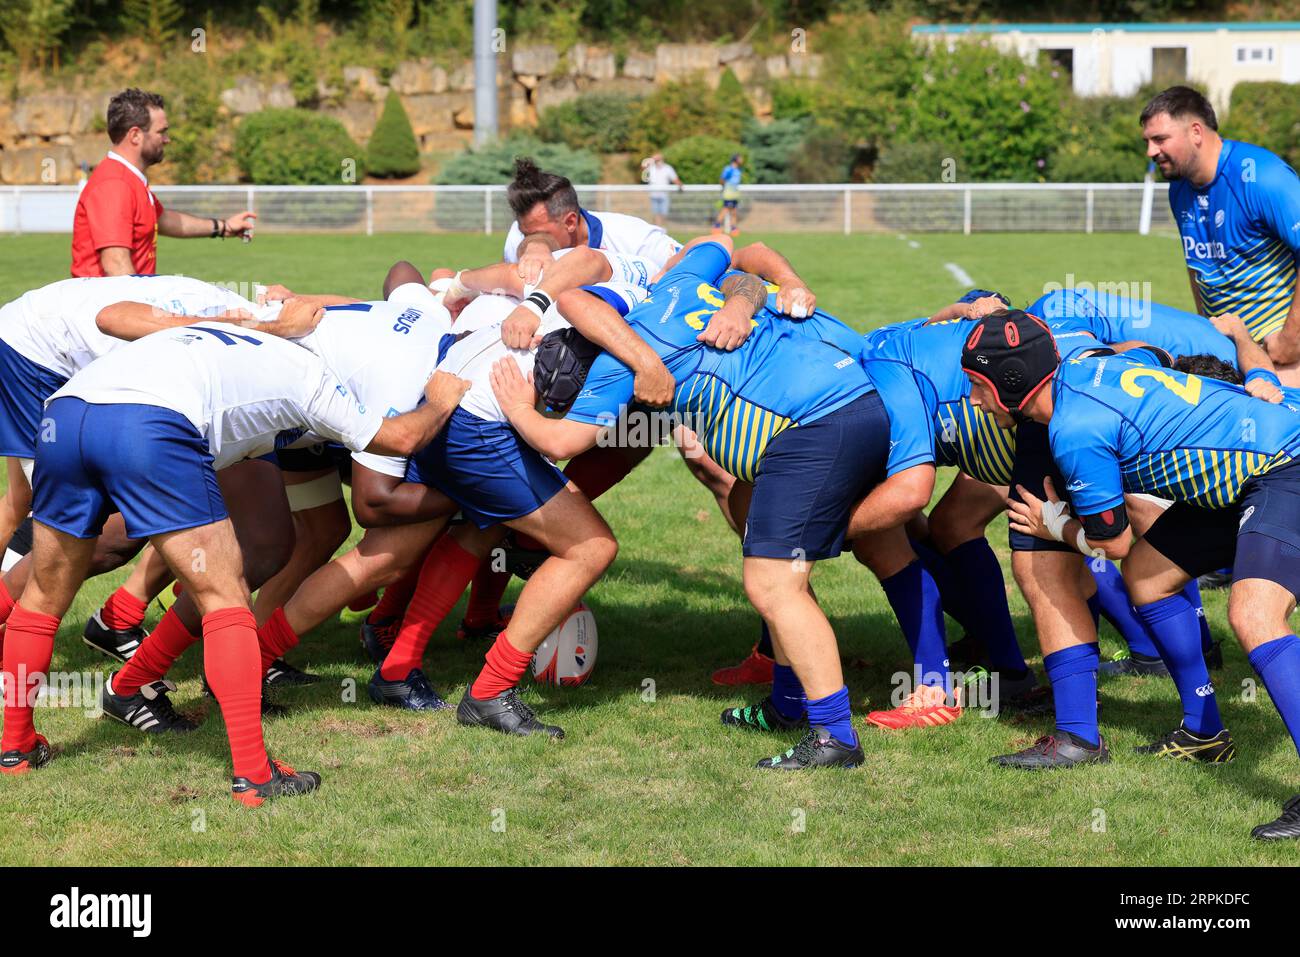 Sarlat, France. September 4, 2023. Parliamentarians' Rugby World Cup 2023 in France. France – European Parliament. The French parliamentary team (in w Stock Photo